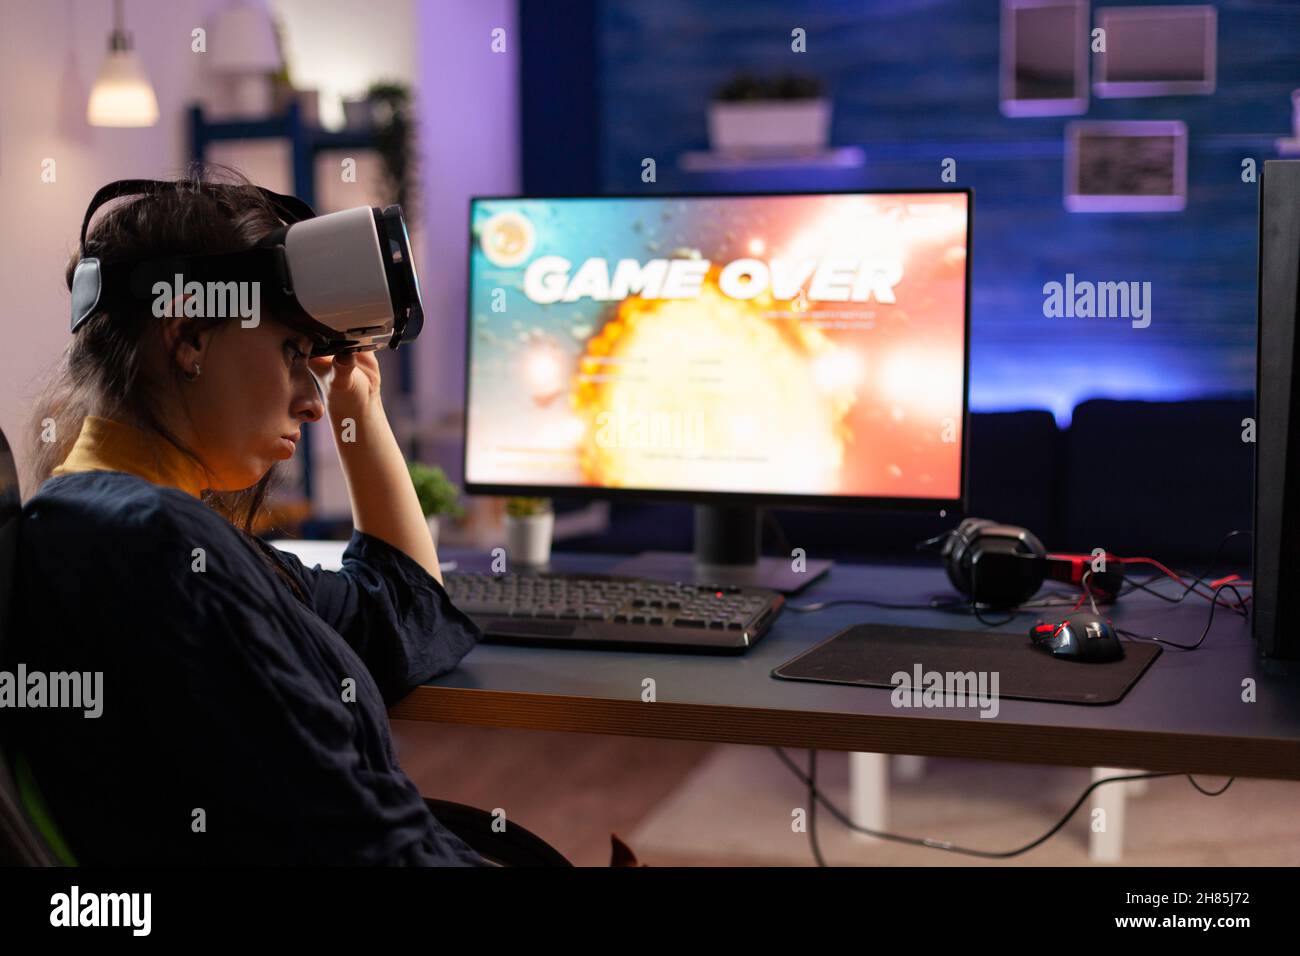 Gamer using vr goggles to play video games and losing on computer. Person playing online game with controller on monitor and virtual reality glasses. Adult with gaming equipment. Stock Photo